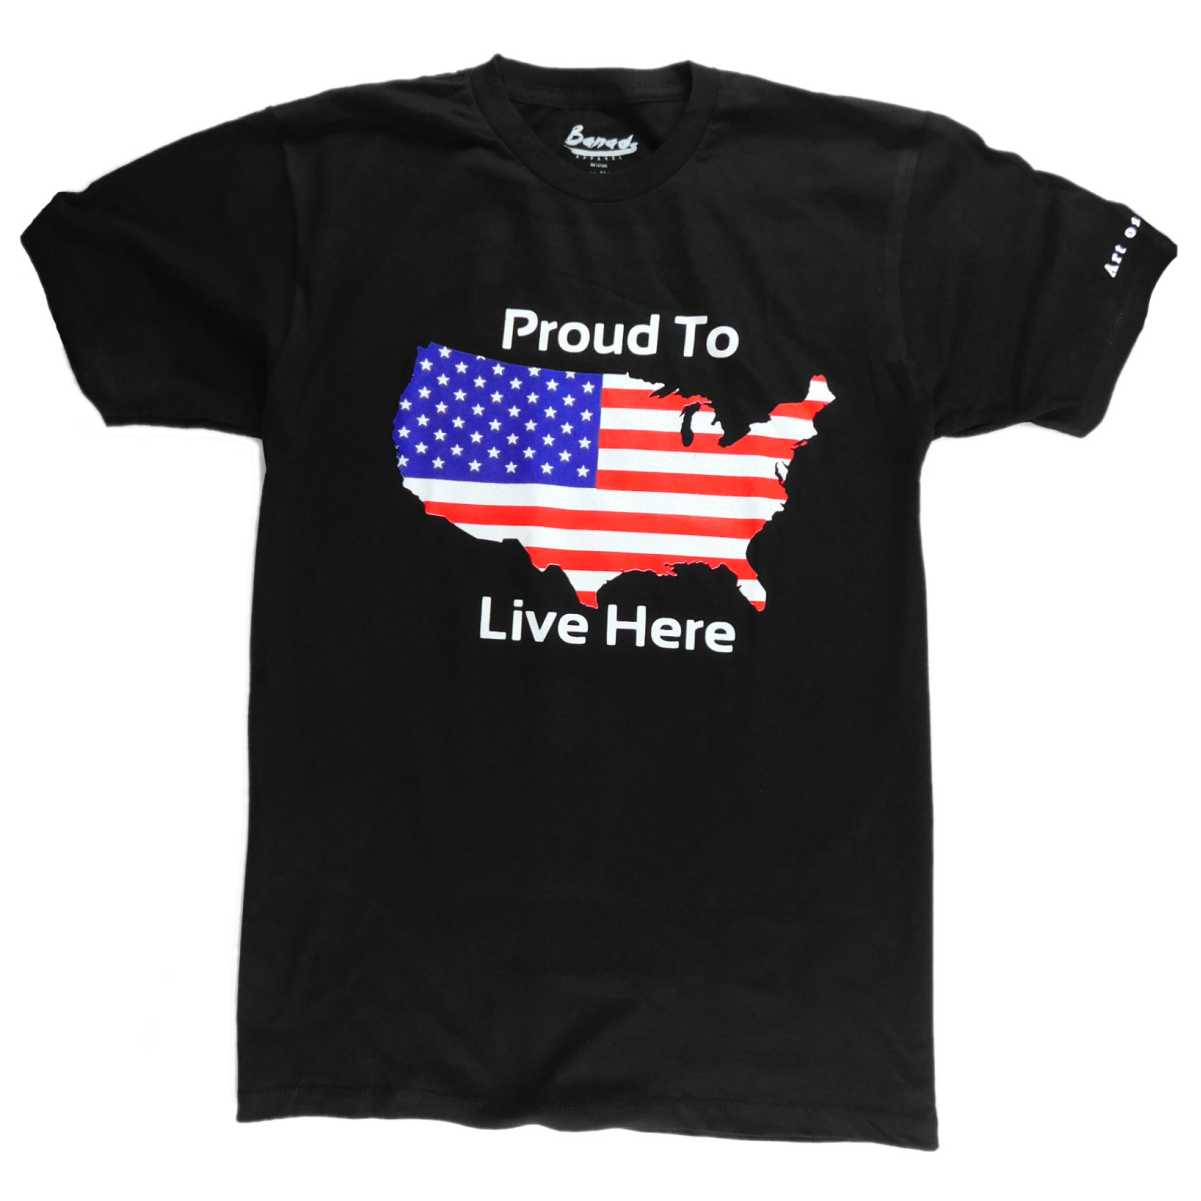 Proud to Live Here - A United States Patriotic T-Shirt - Black